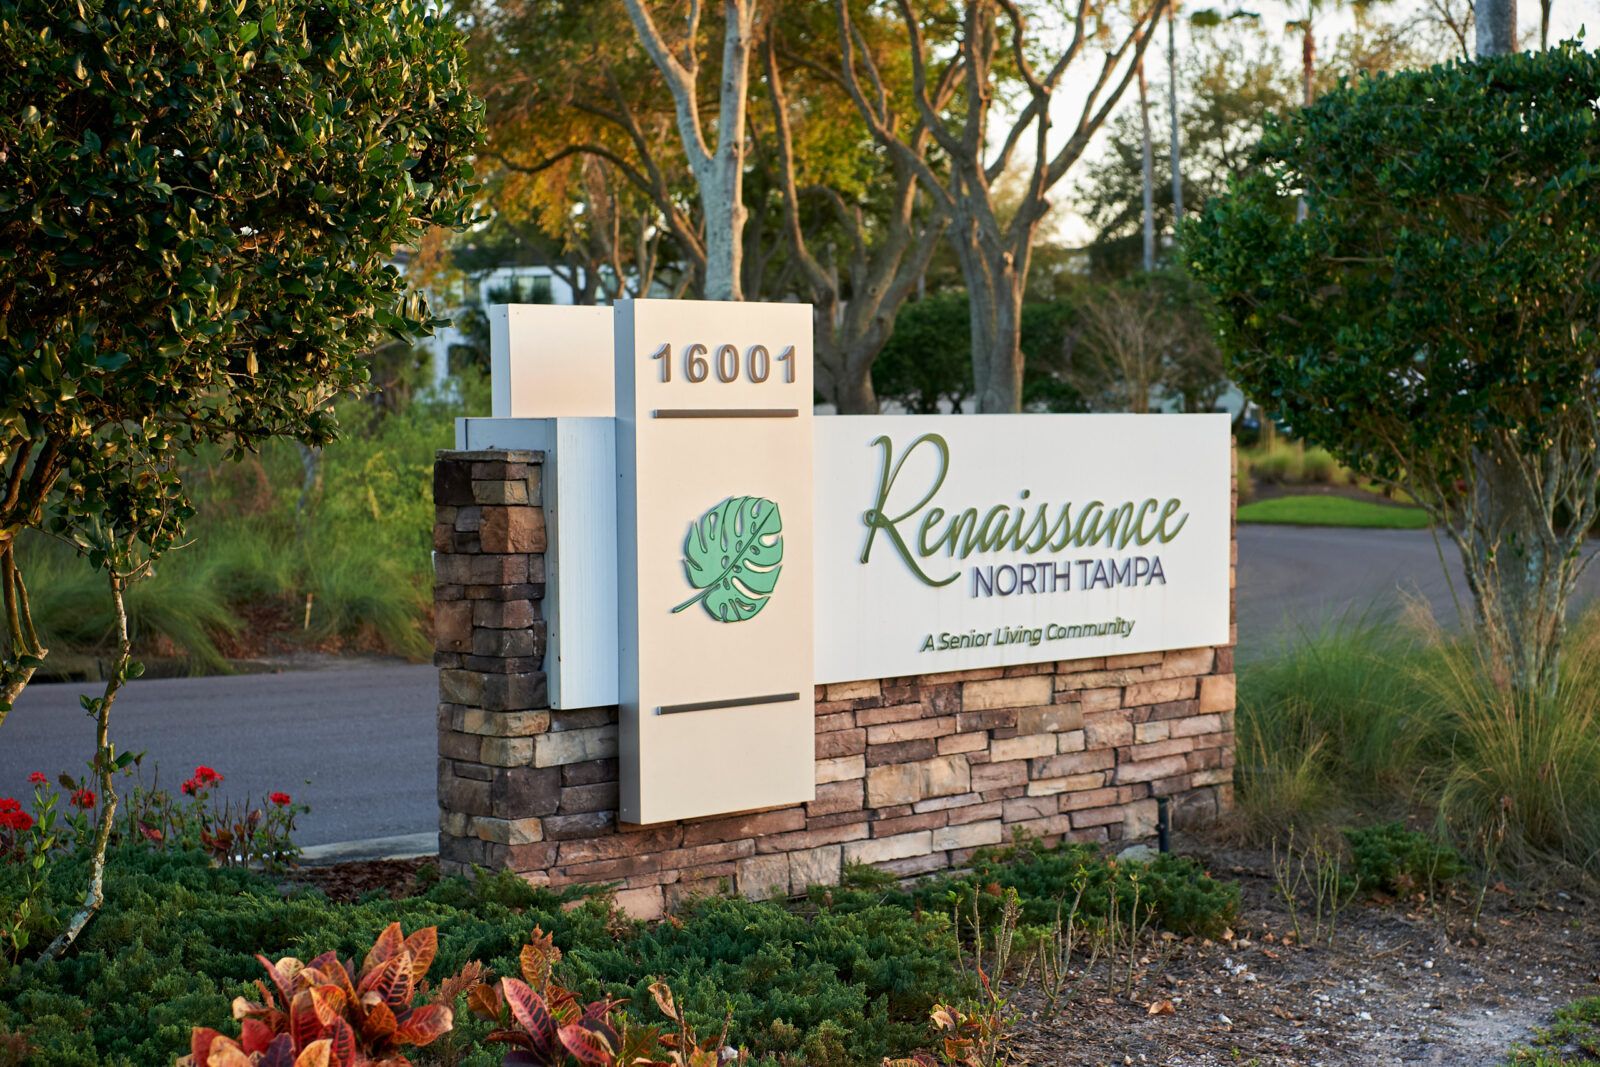 Renaissance North Tampa senior living community surrounded by lush park, trees, and wildlife.